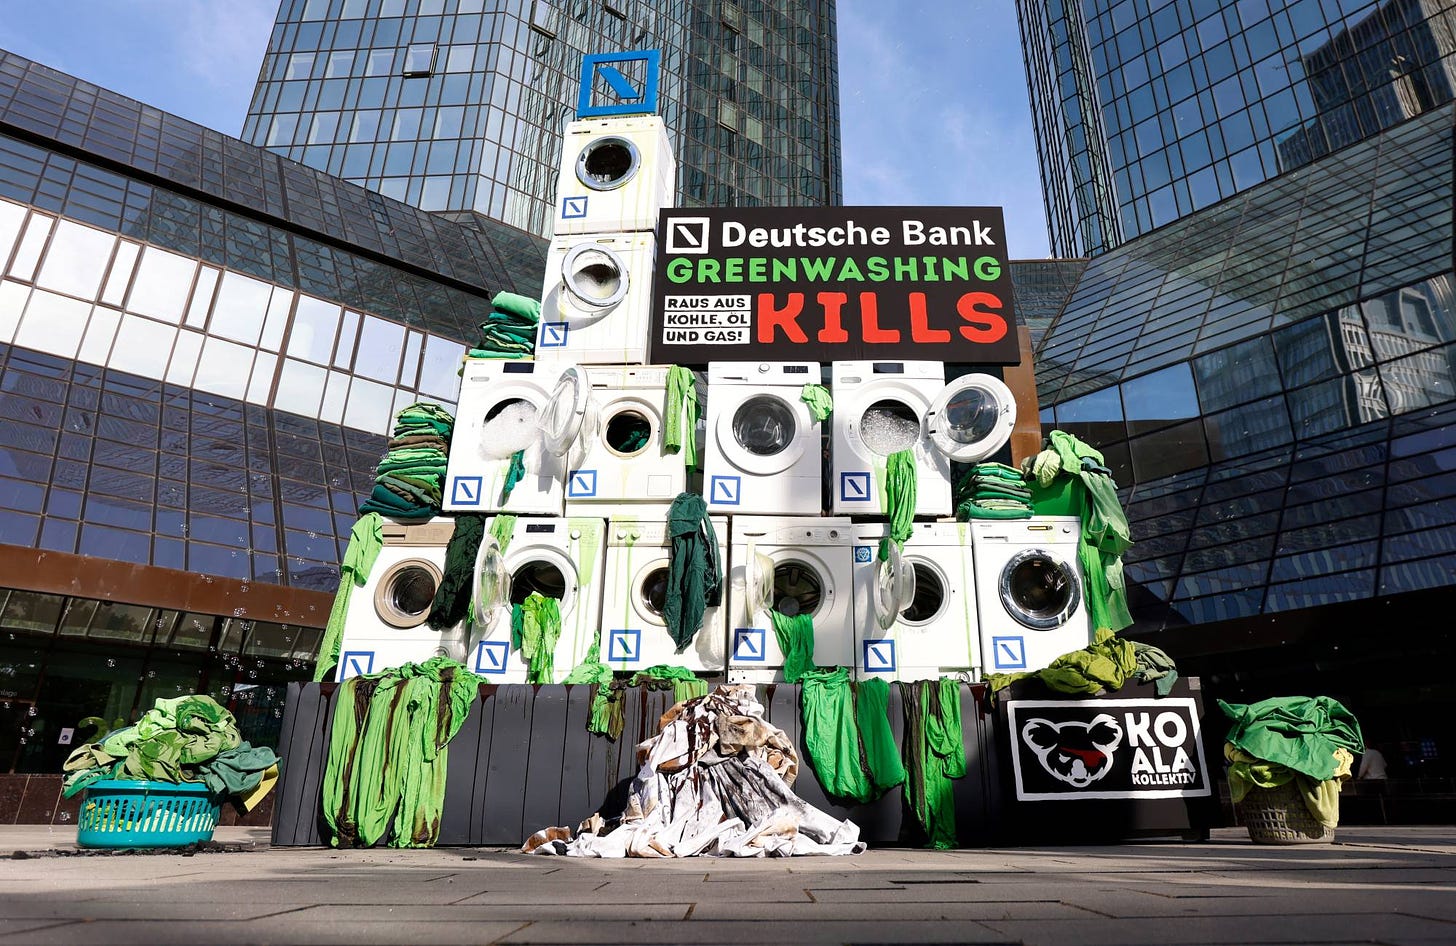 Activists place washing machines in front of the Deutsche Bank headquarters to protest against greenwashing during the banks annual shareholders meeting in Frankfurt, Germany, on May 19. | REUTERS